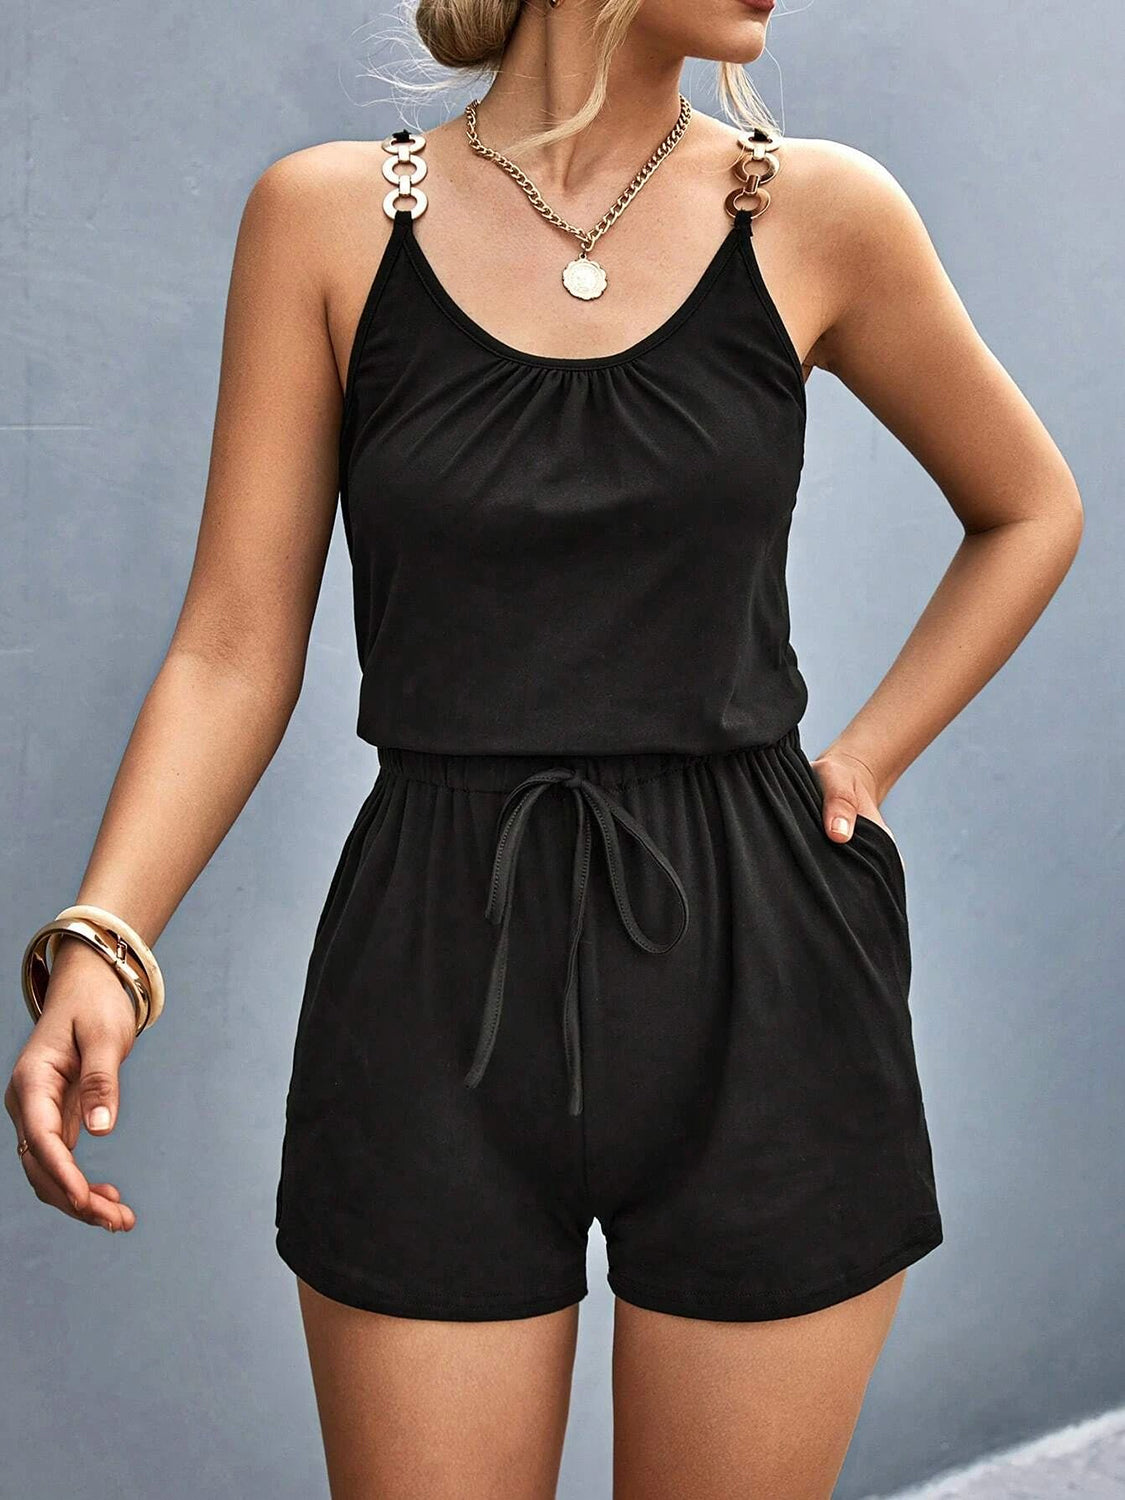 Pocketed Buckle Trim Scoop Neck Romper Sunset and Swim Black S 